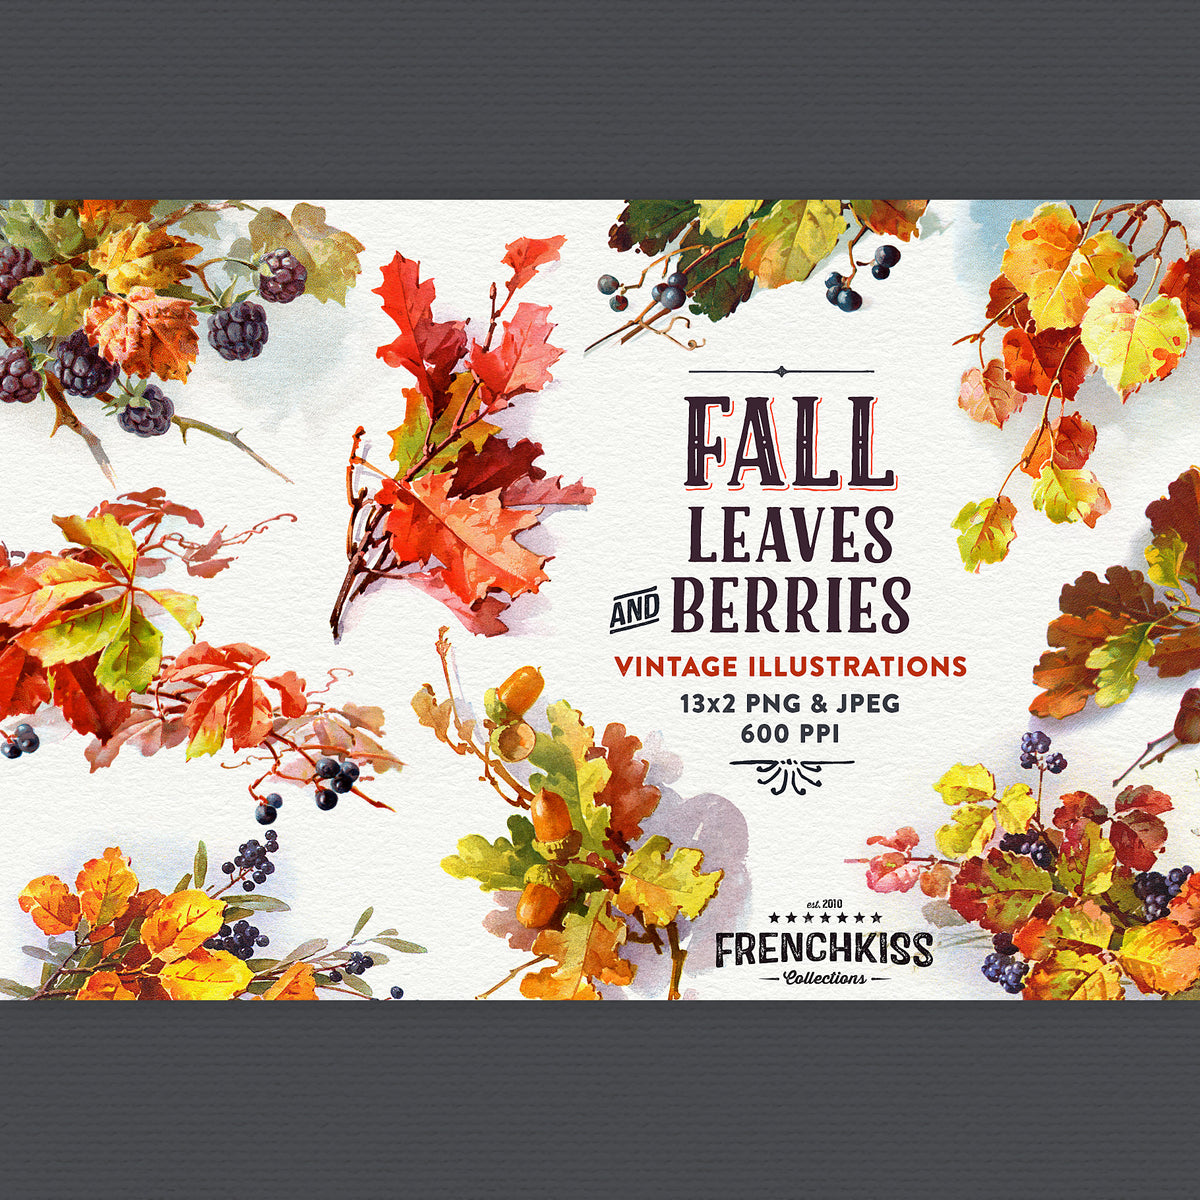 Fall Leaves and Berries Vintage Graphics 600 DPI extended license.